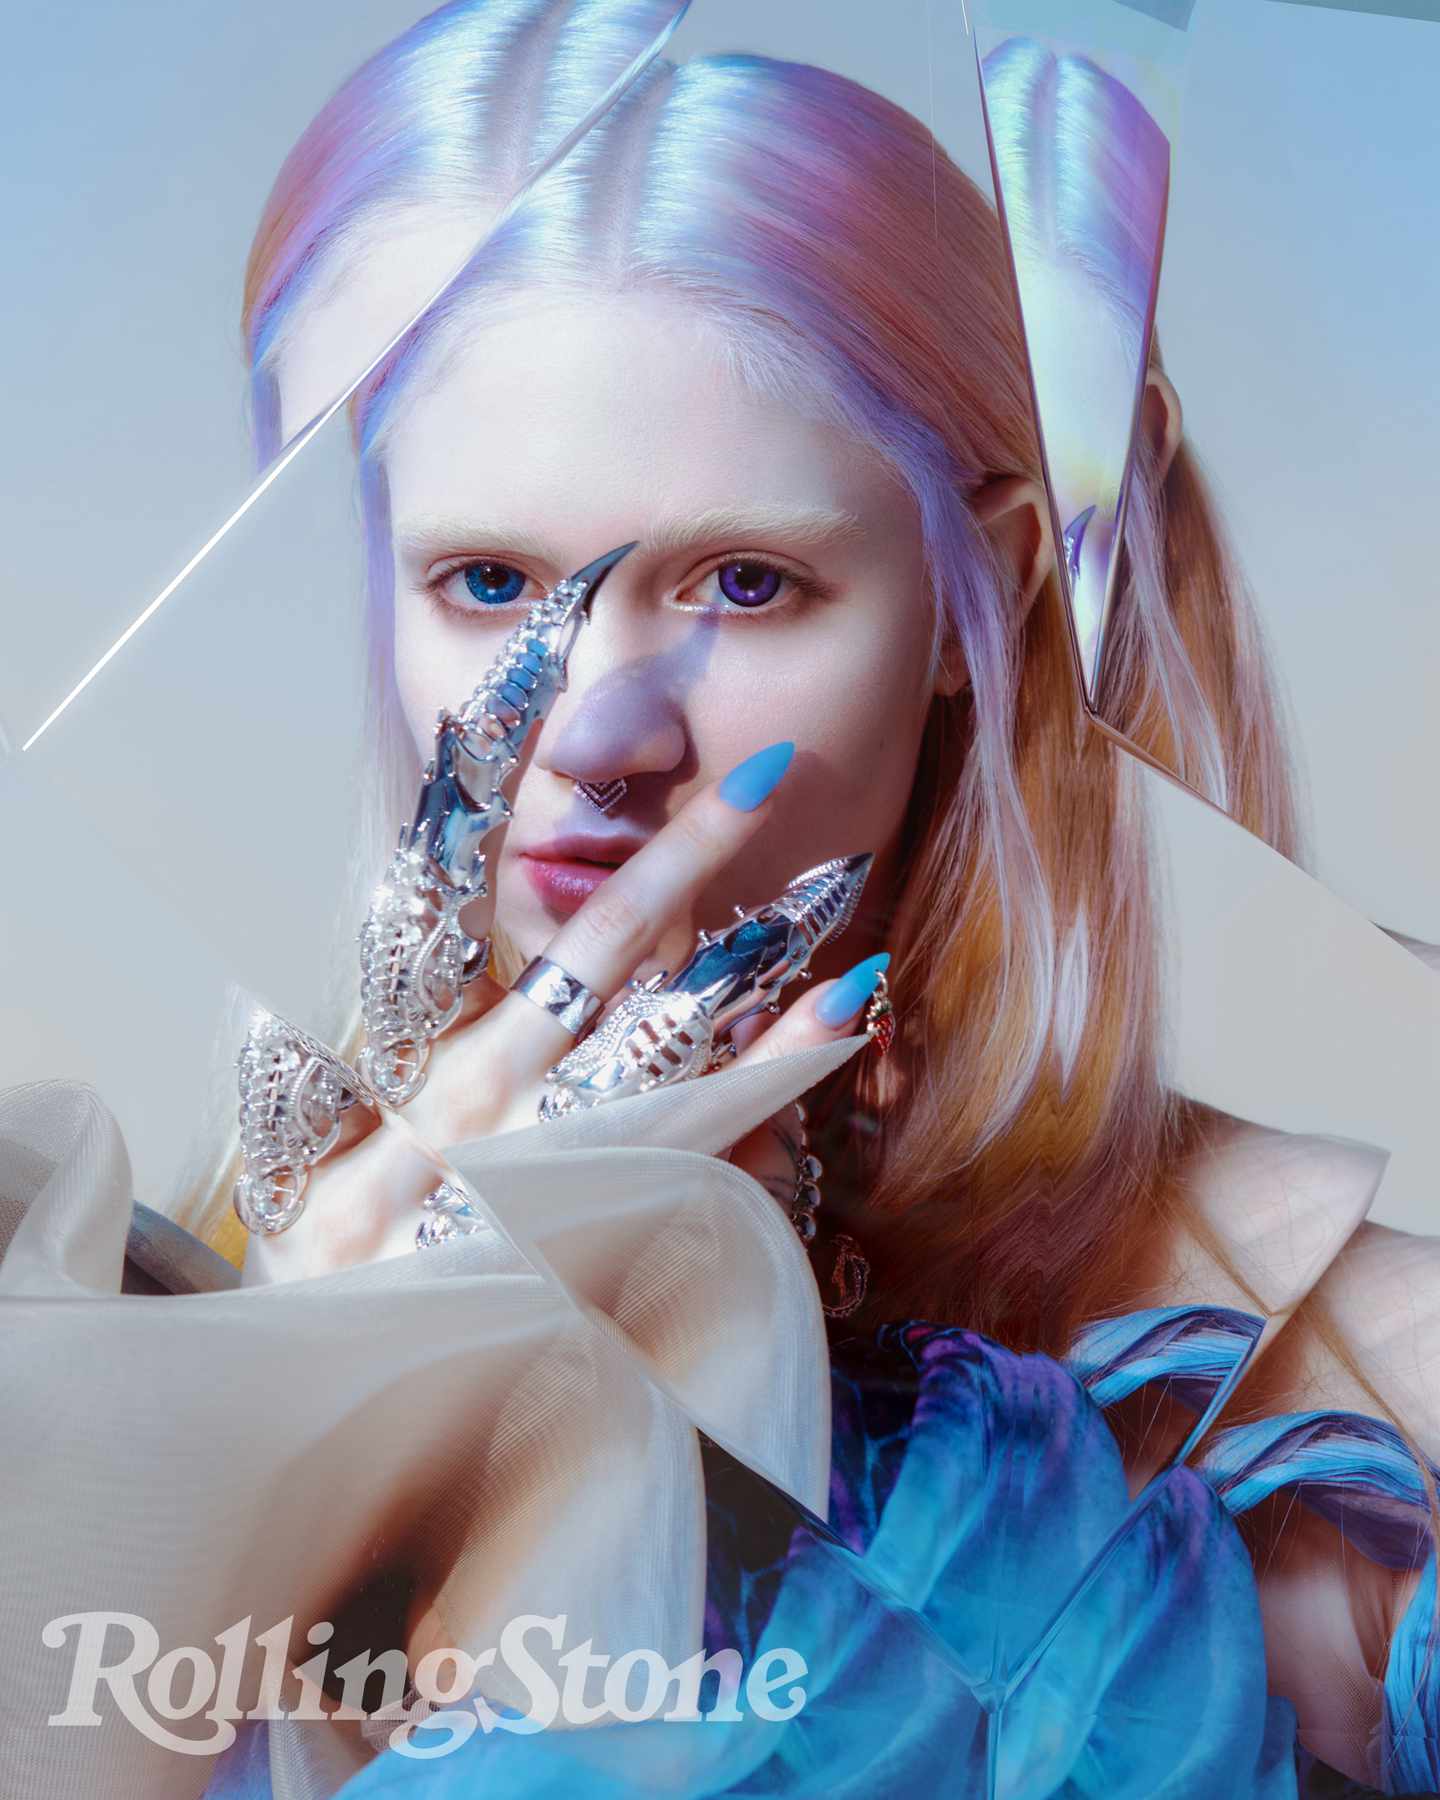 Grimes for Rolling Stone